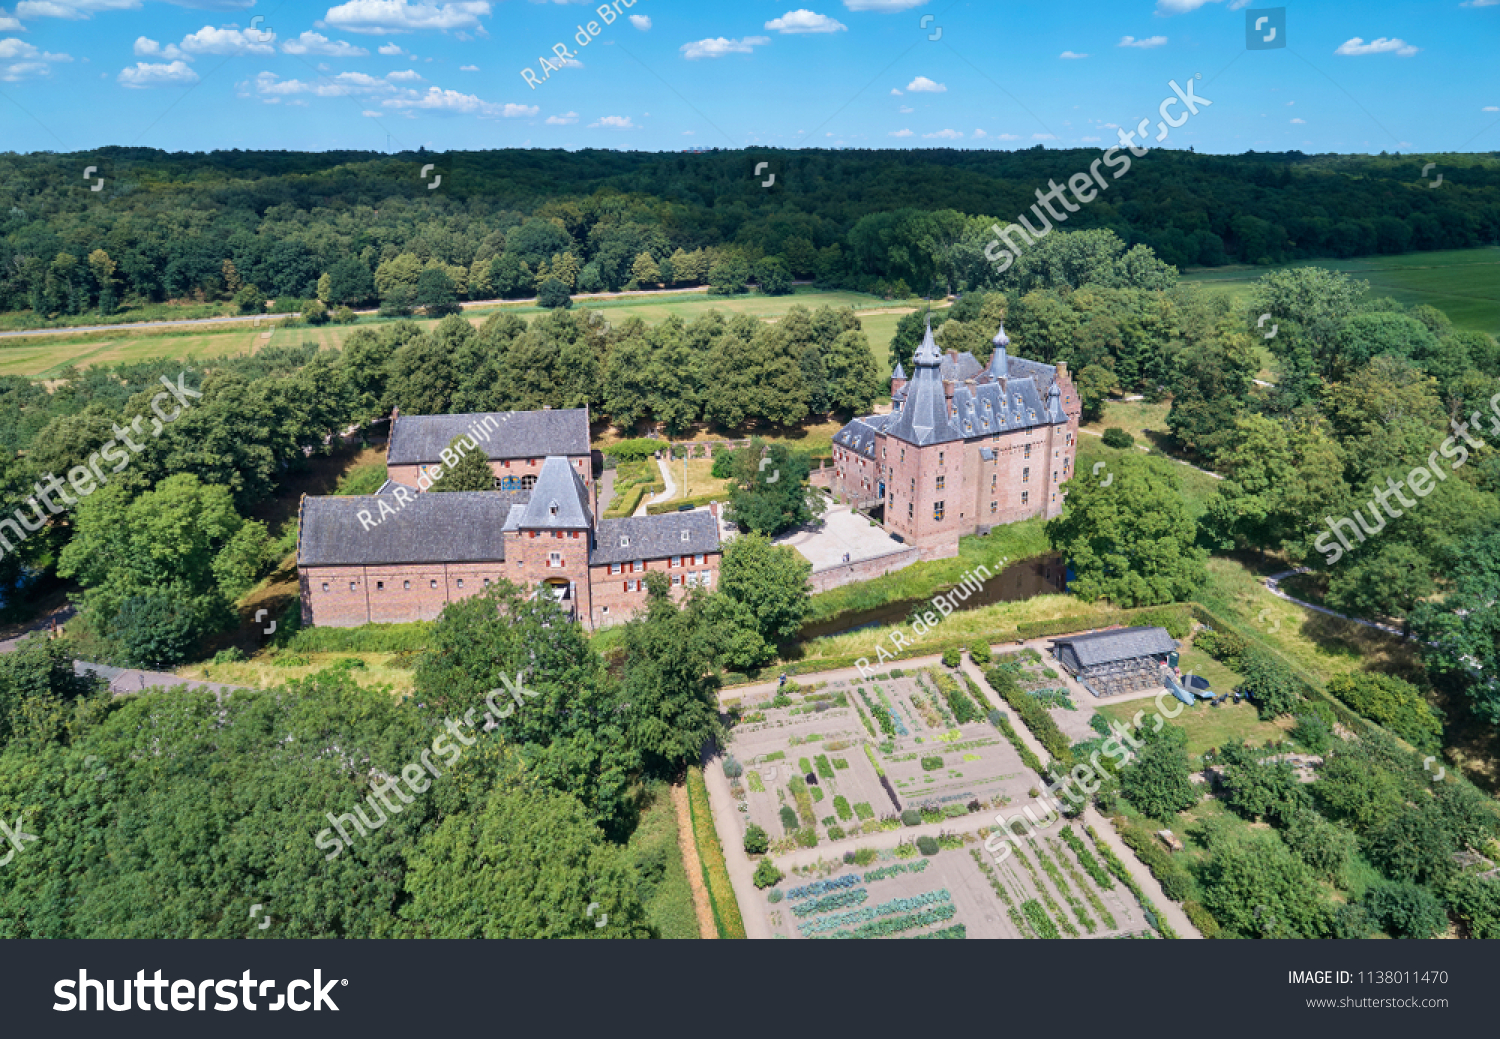 Aerial view of the medieval castle 'Doorwerth', first mentioned in 1260, near the little village 'Doorwerth' in the province of 'Gelderland', the Netherlands #1138011470